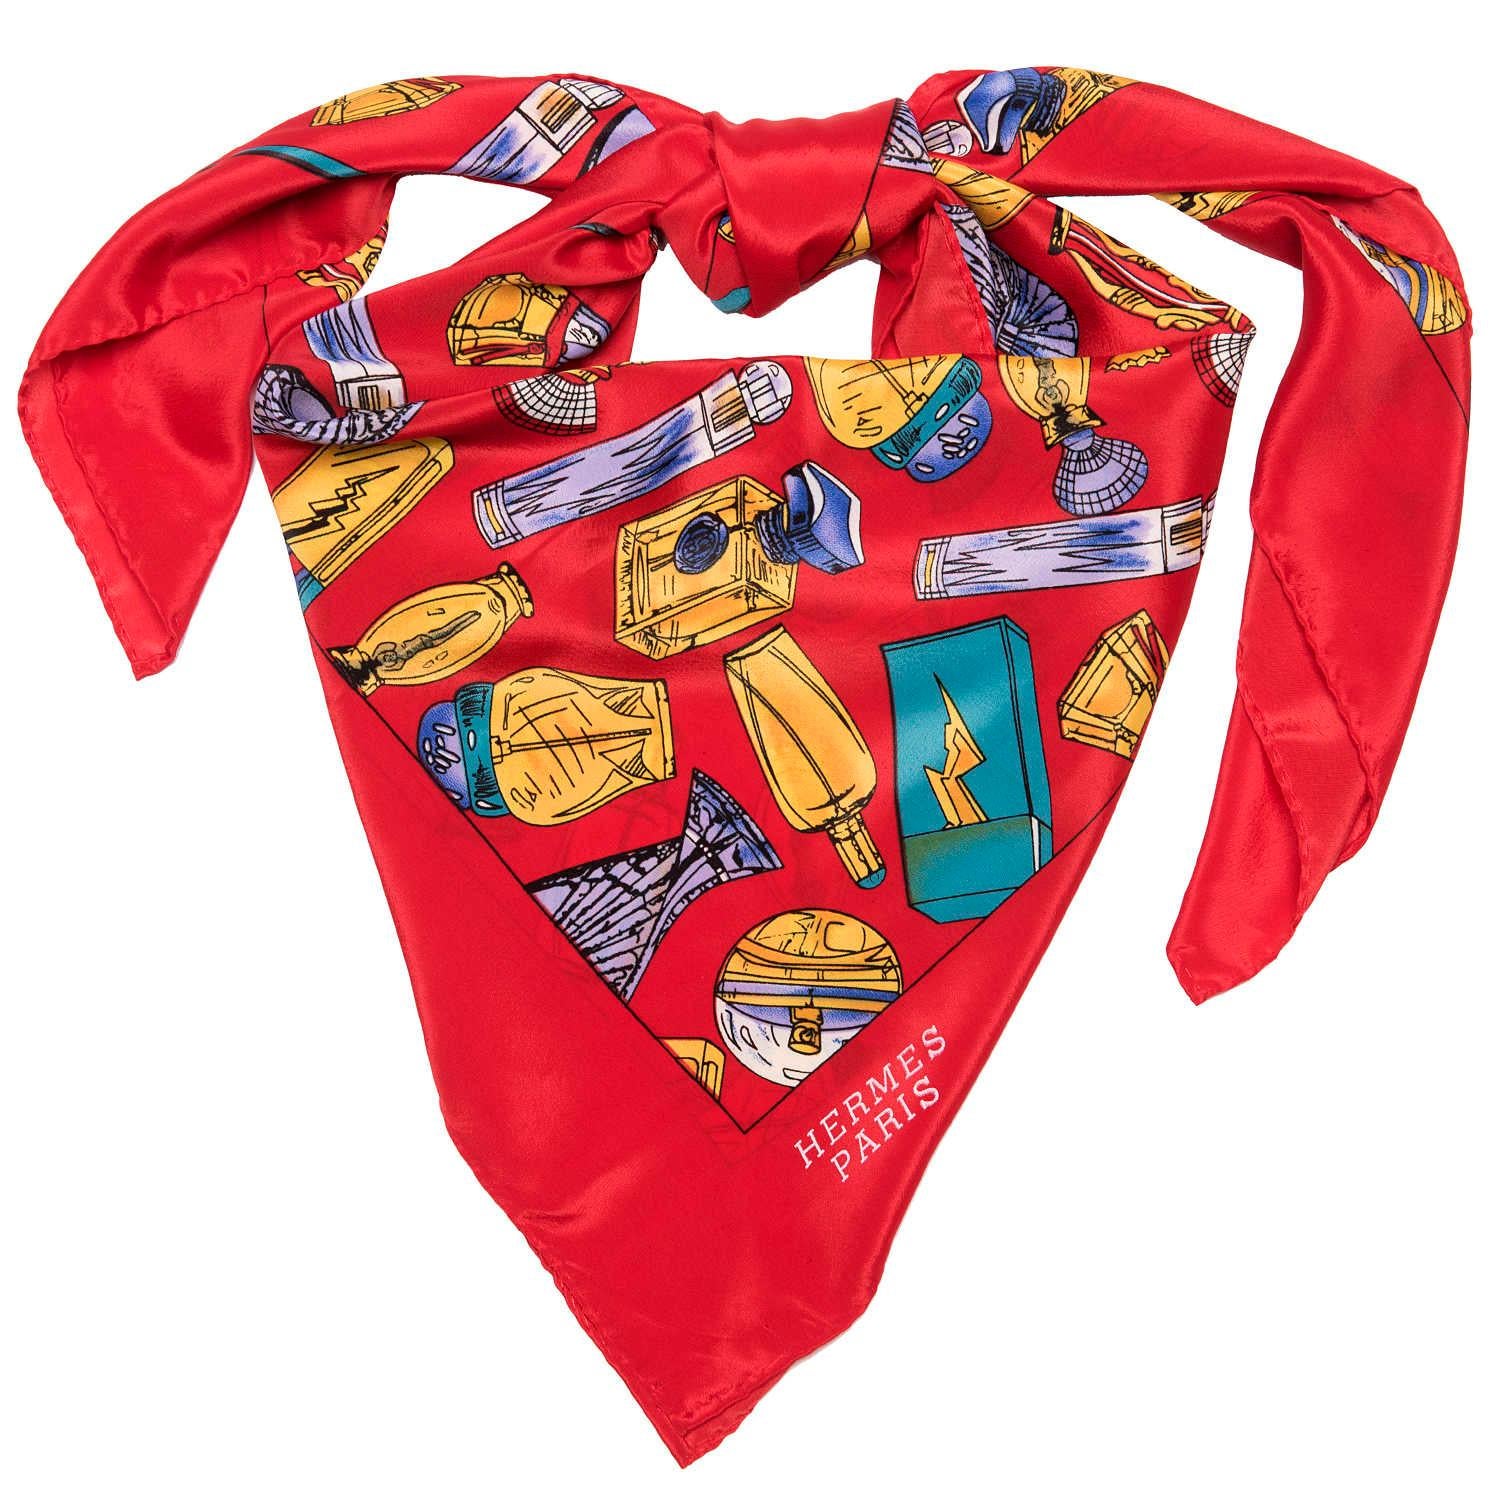 Superb Hermes Silk Scarf with a red border, with the perfumes of the world illustrated in multicoloured designs. In excellent condition, with no tears, holes, marks or odours.